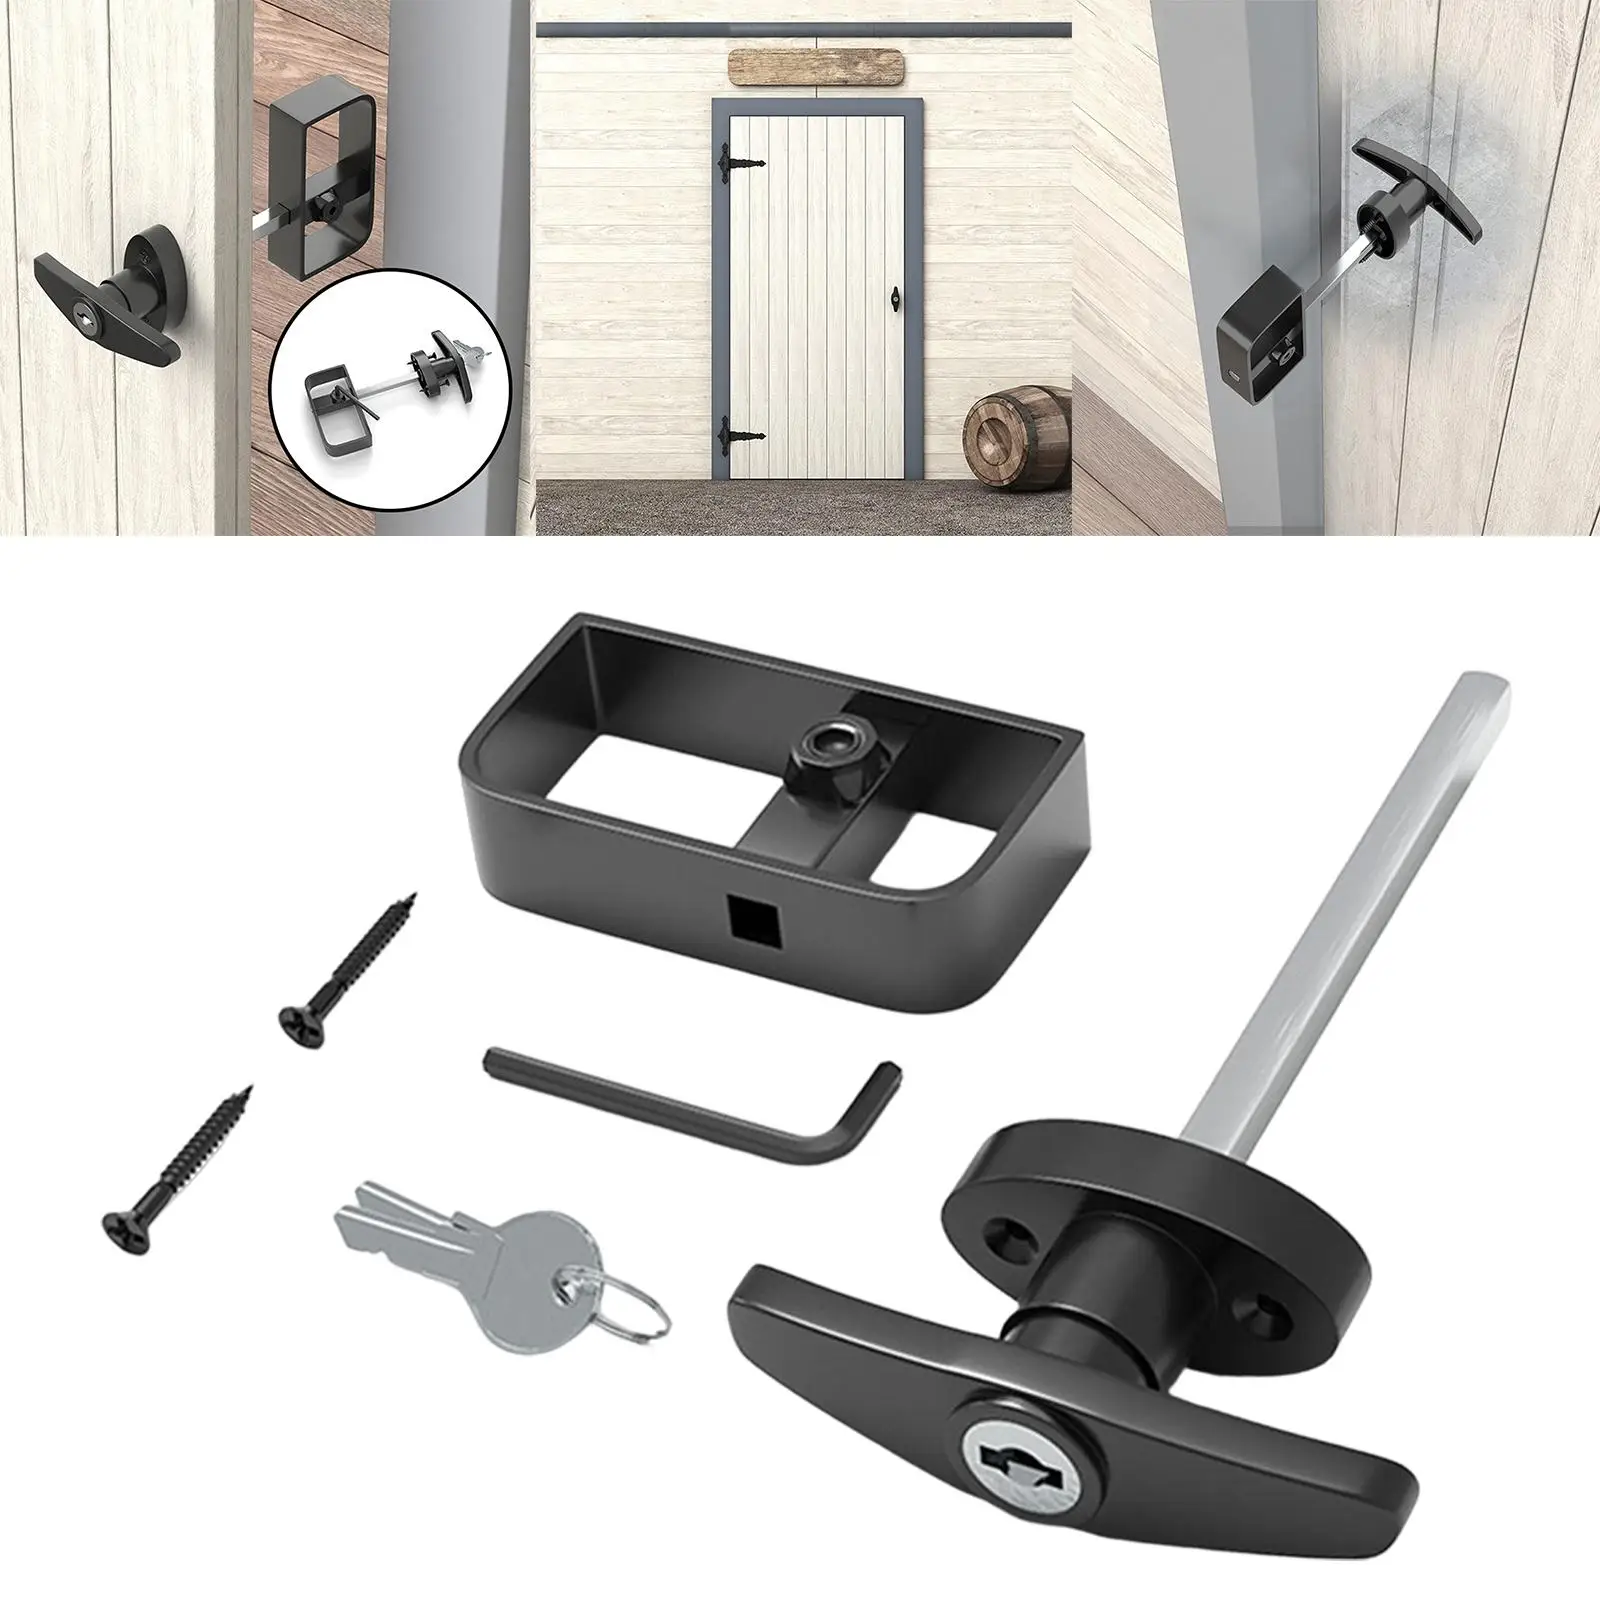 

T Handle Lock Locking with Keys Cabinet Lock Locks Electric Cabinet Lock Replacement for Gate Toolbox Truck Trailer Shed